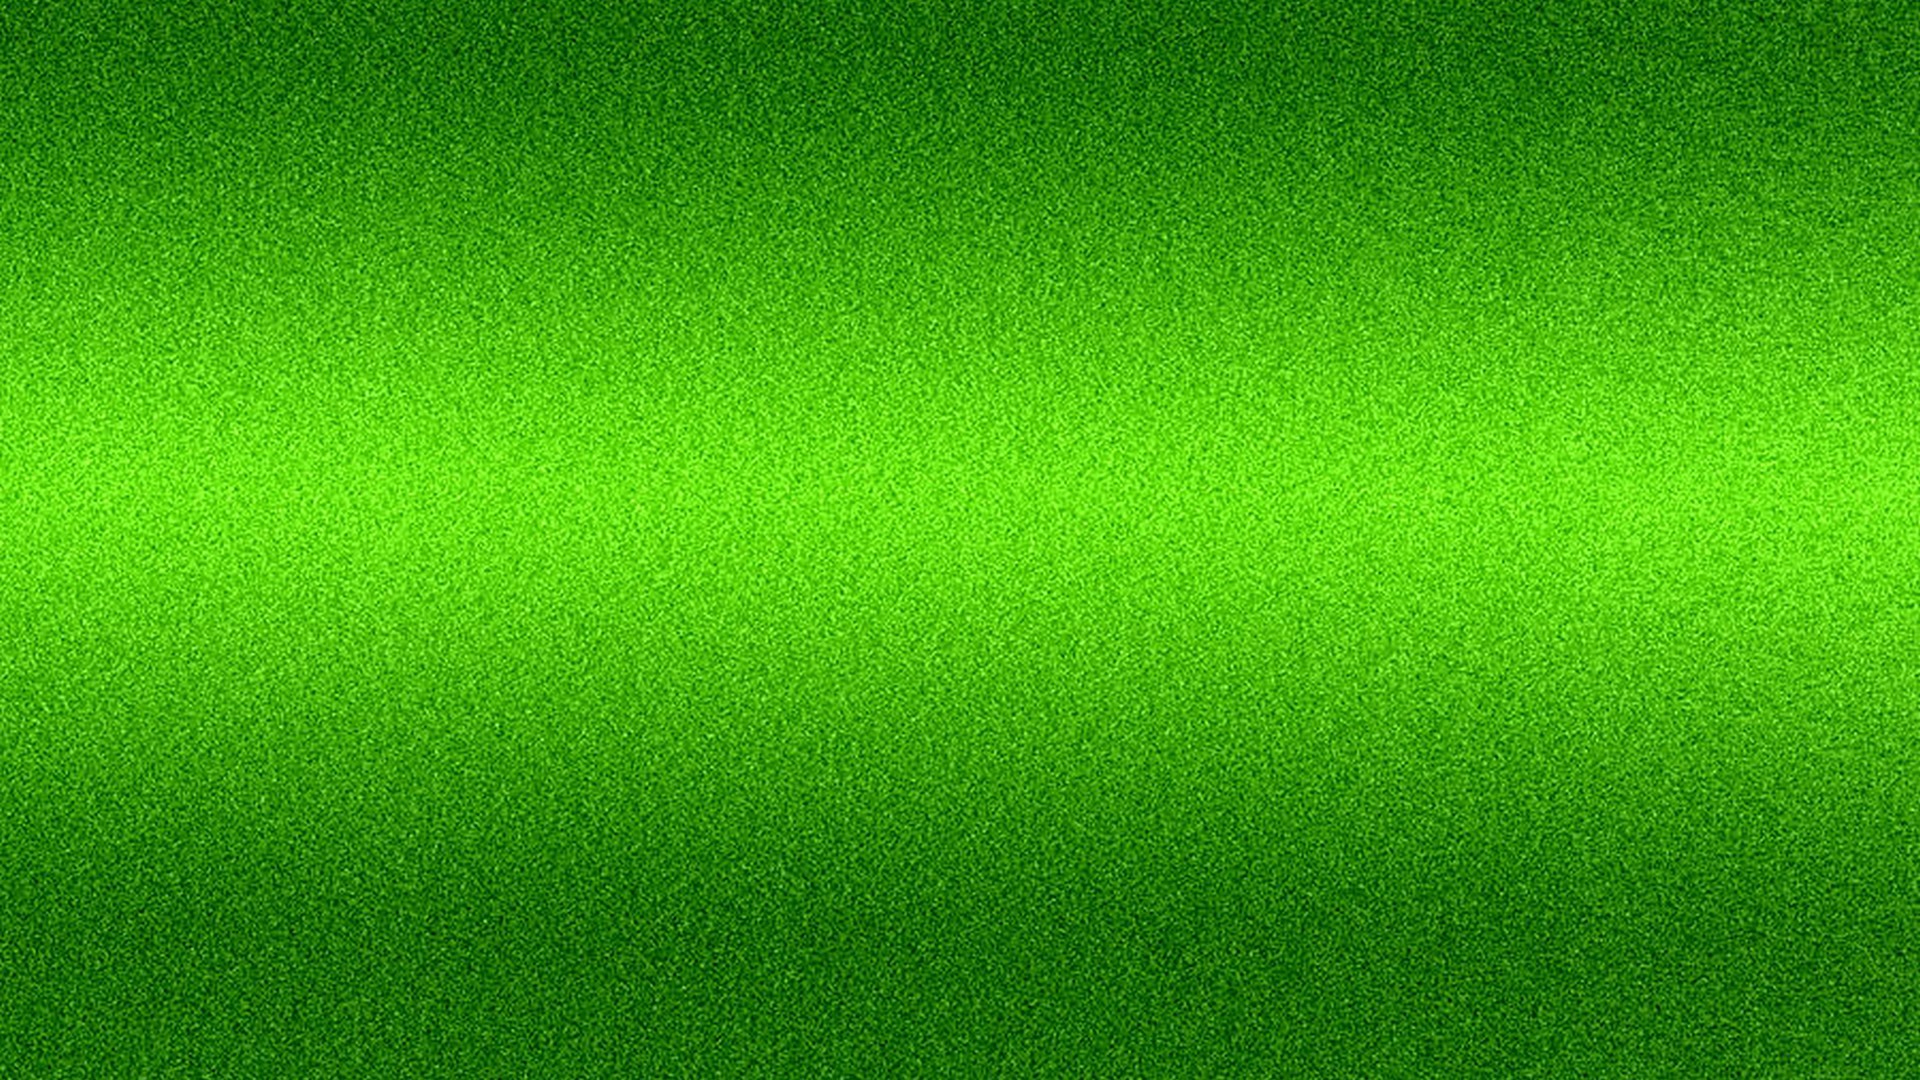 HD Wallpaper Green Colour with image resolution 1920x1080 pixel. You can make this wallpaper for your Desktop Computer Backgrounds, Mac Wallpapers, Android Lock screen or iPhone Screensavers